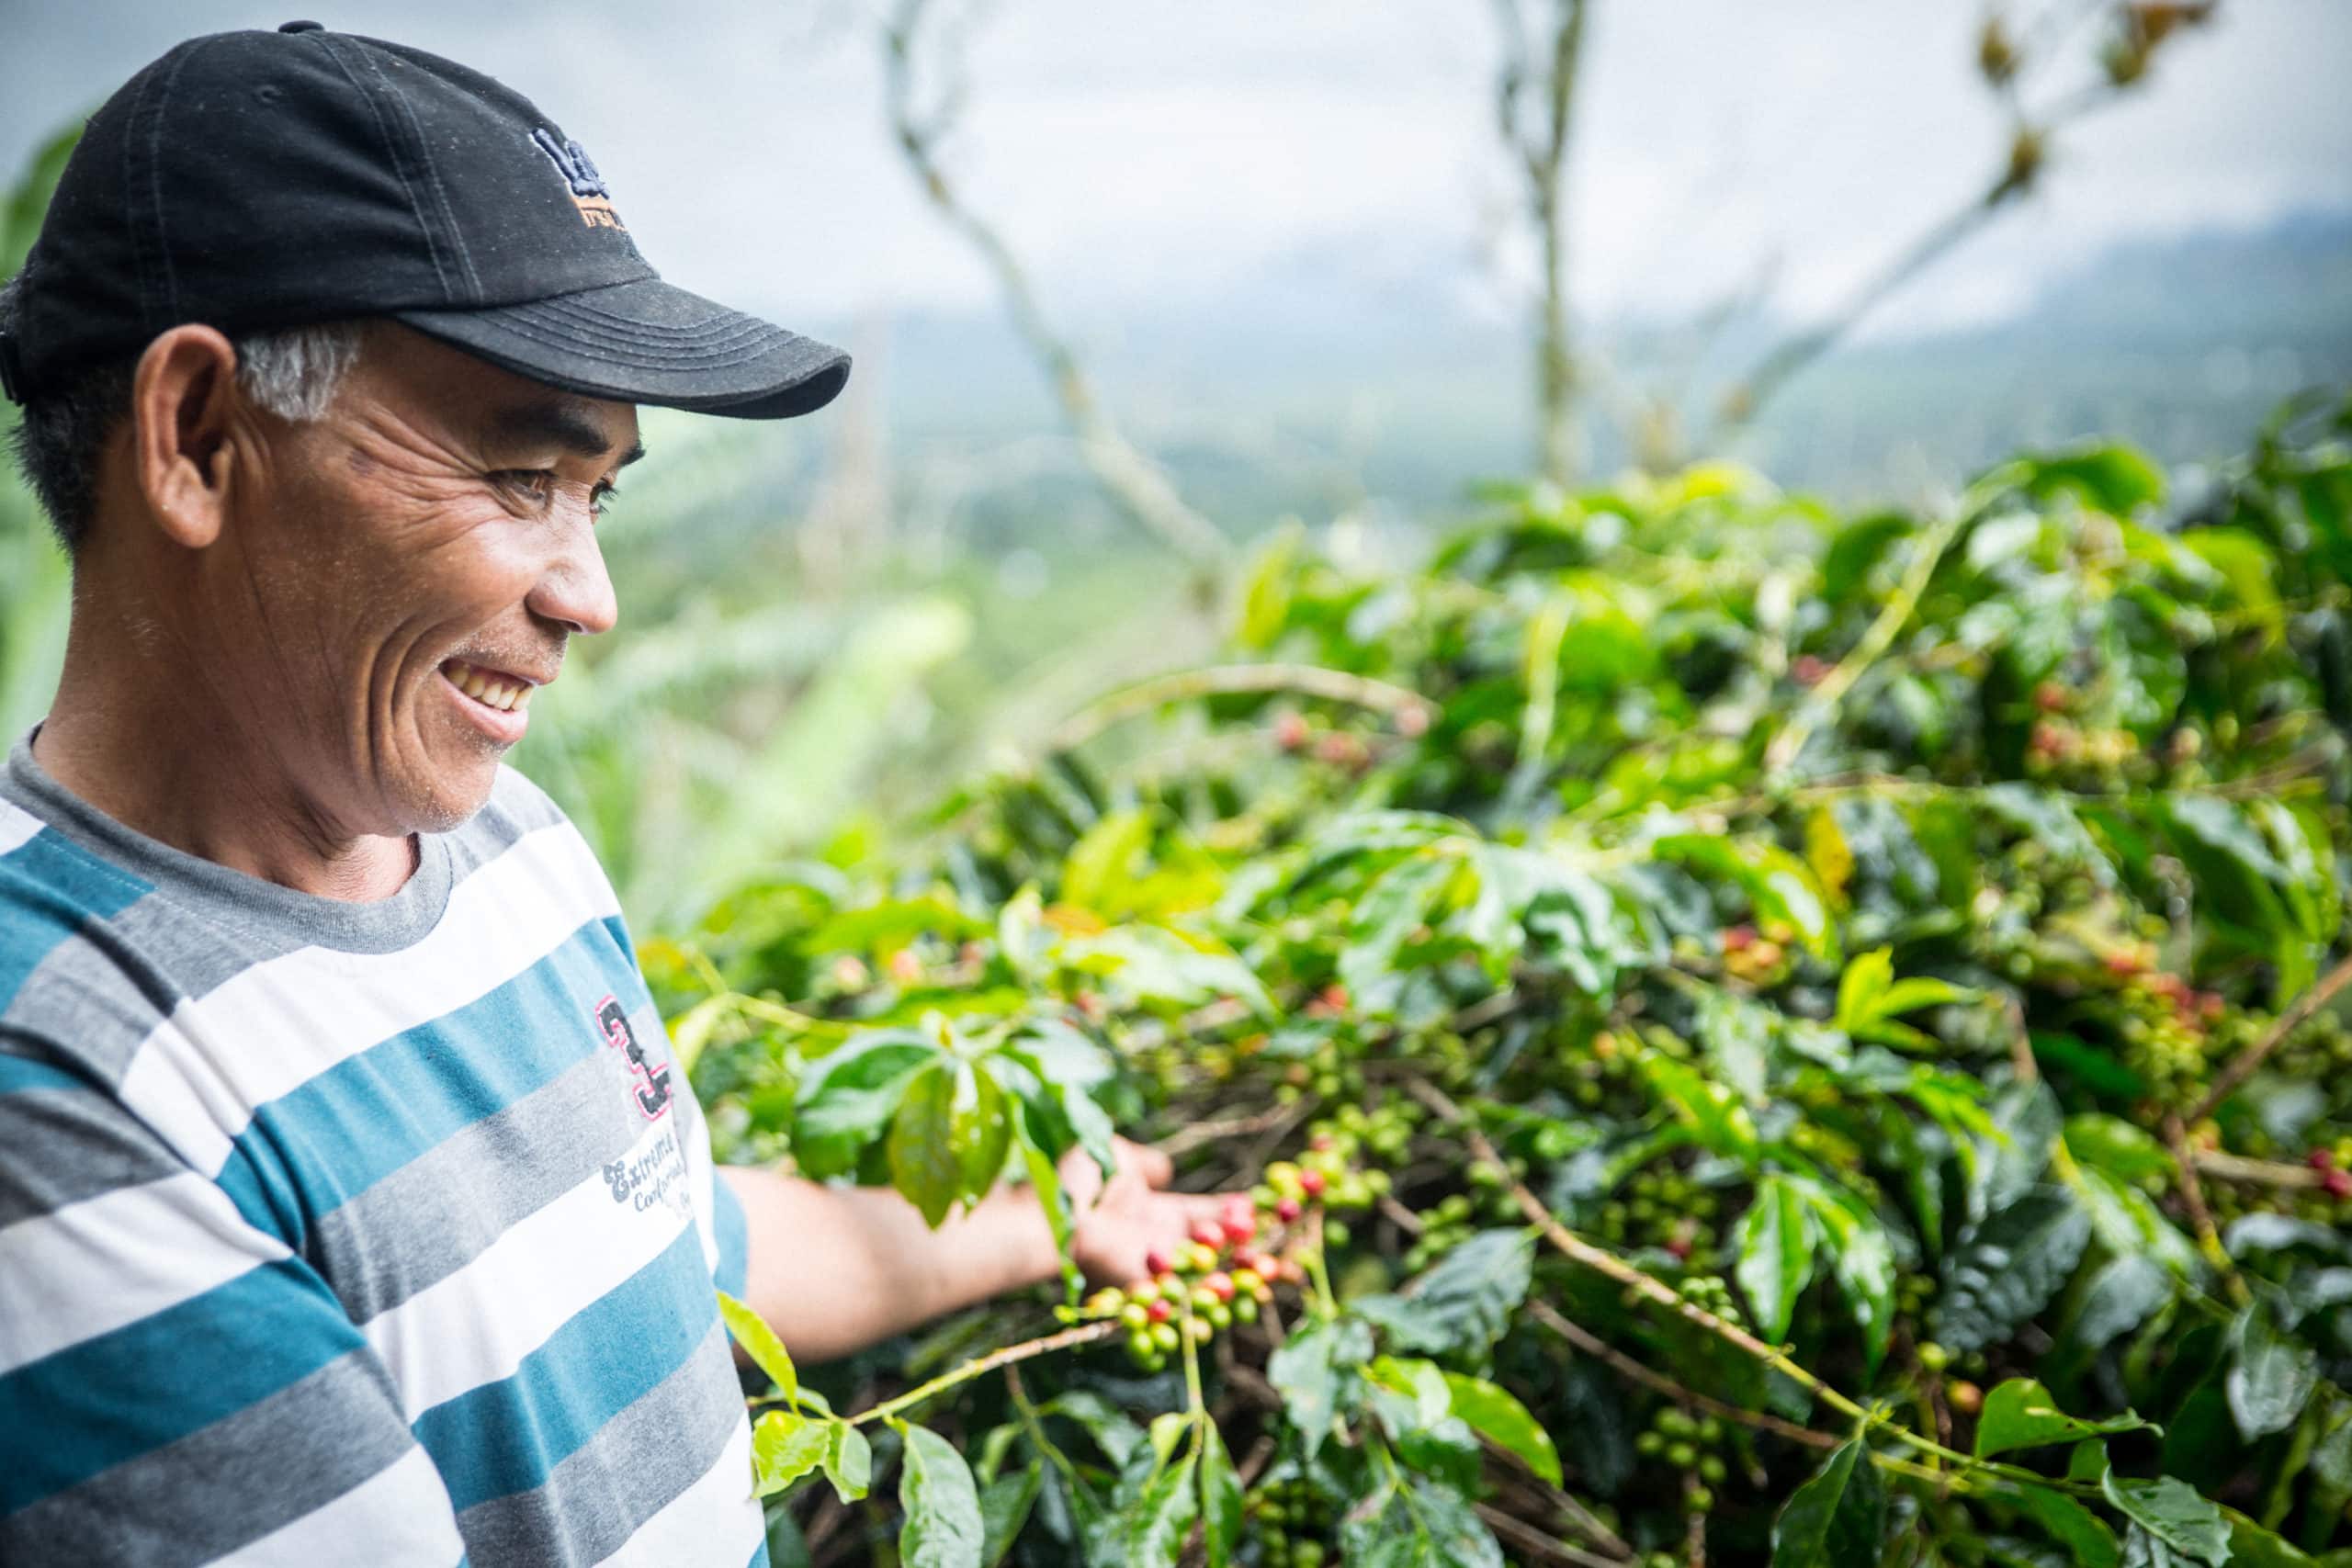 How Indonesia’s Coffee Farmers Are Protecting Its Most Critical Forest